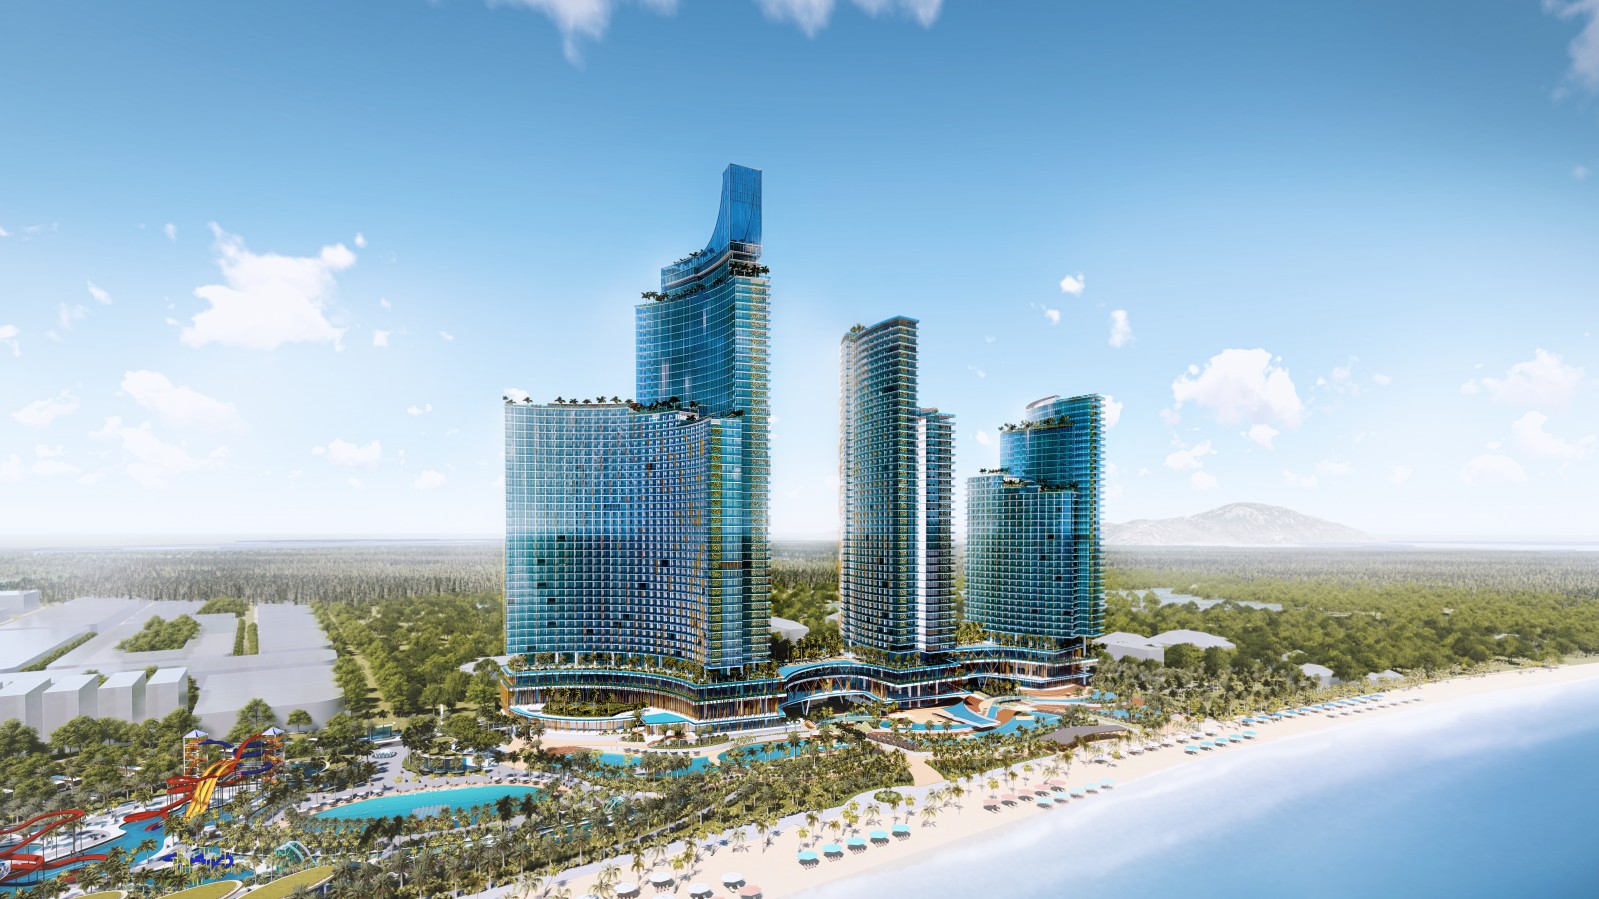 Design of the SunBay Park Hotel & Resort Phan Rang complex which will be finished by 2021.